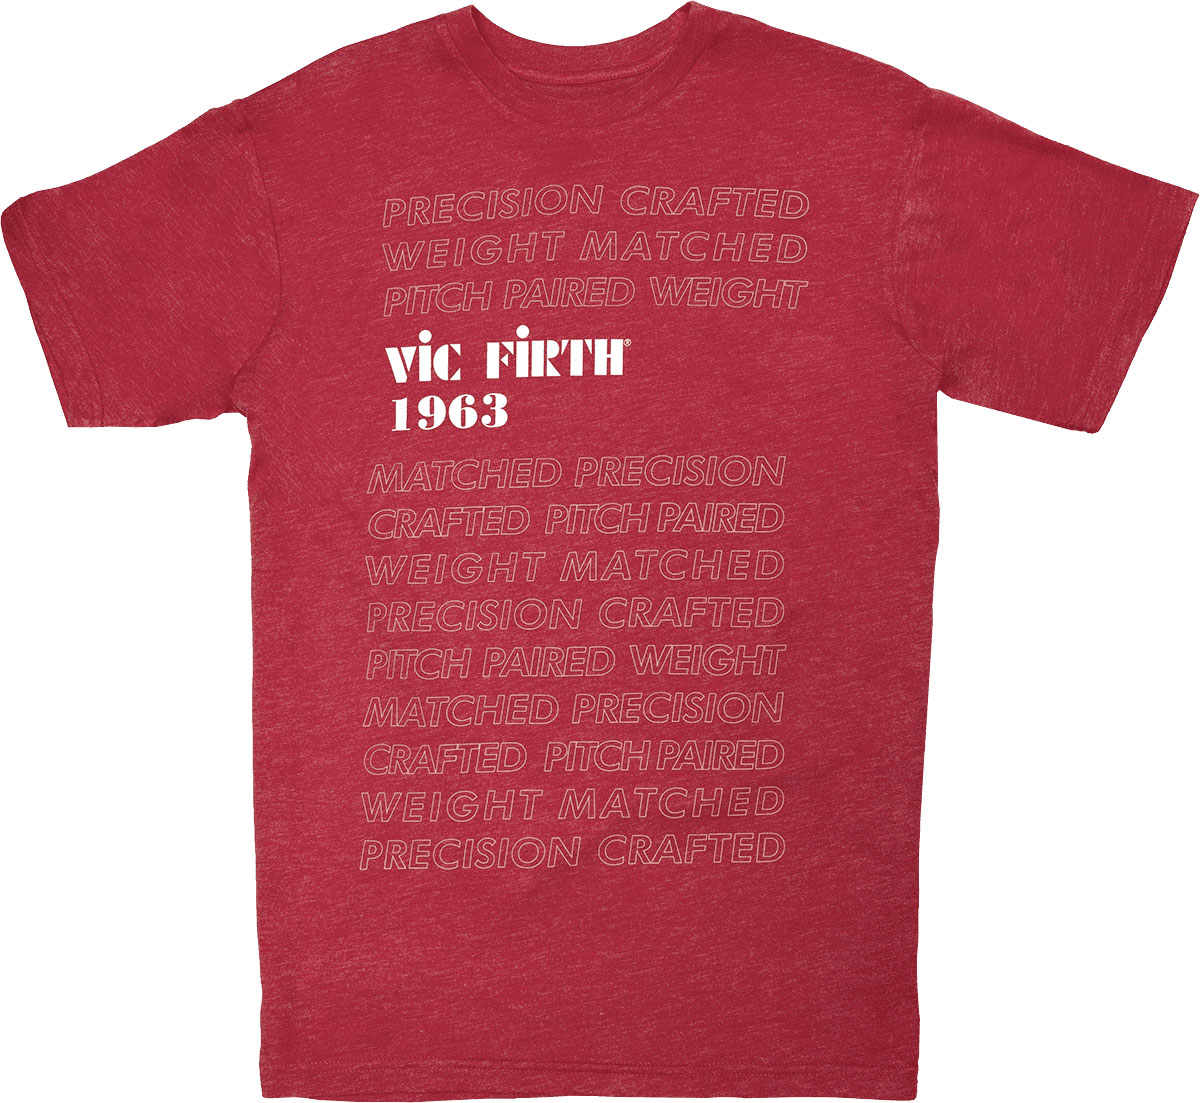 VIC FIRTH TEE-SHIRT 1963 RED GRAPHIC S